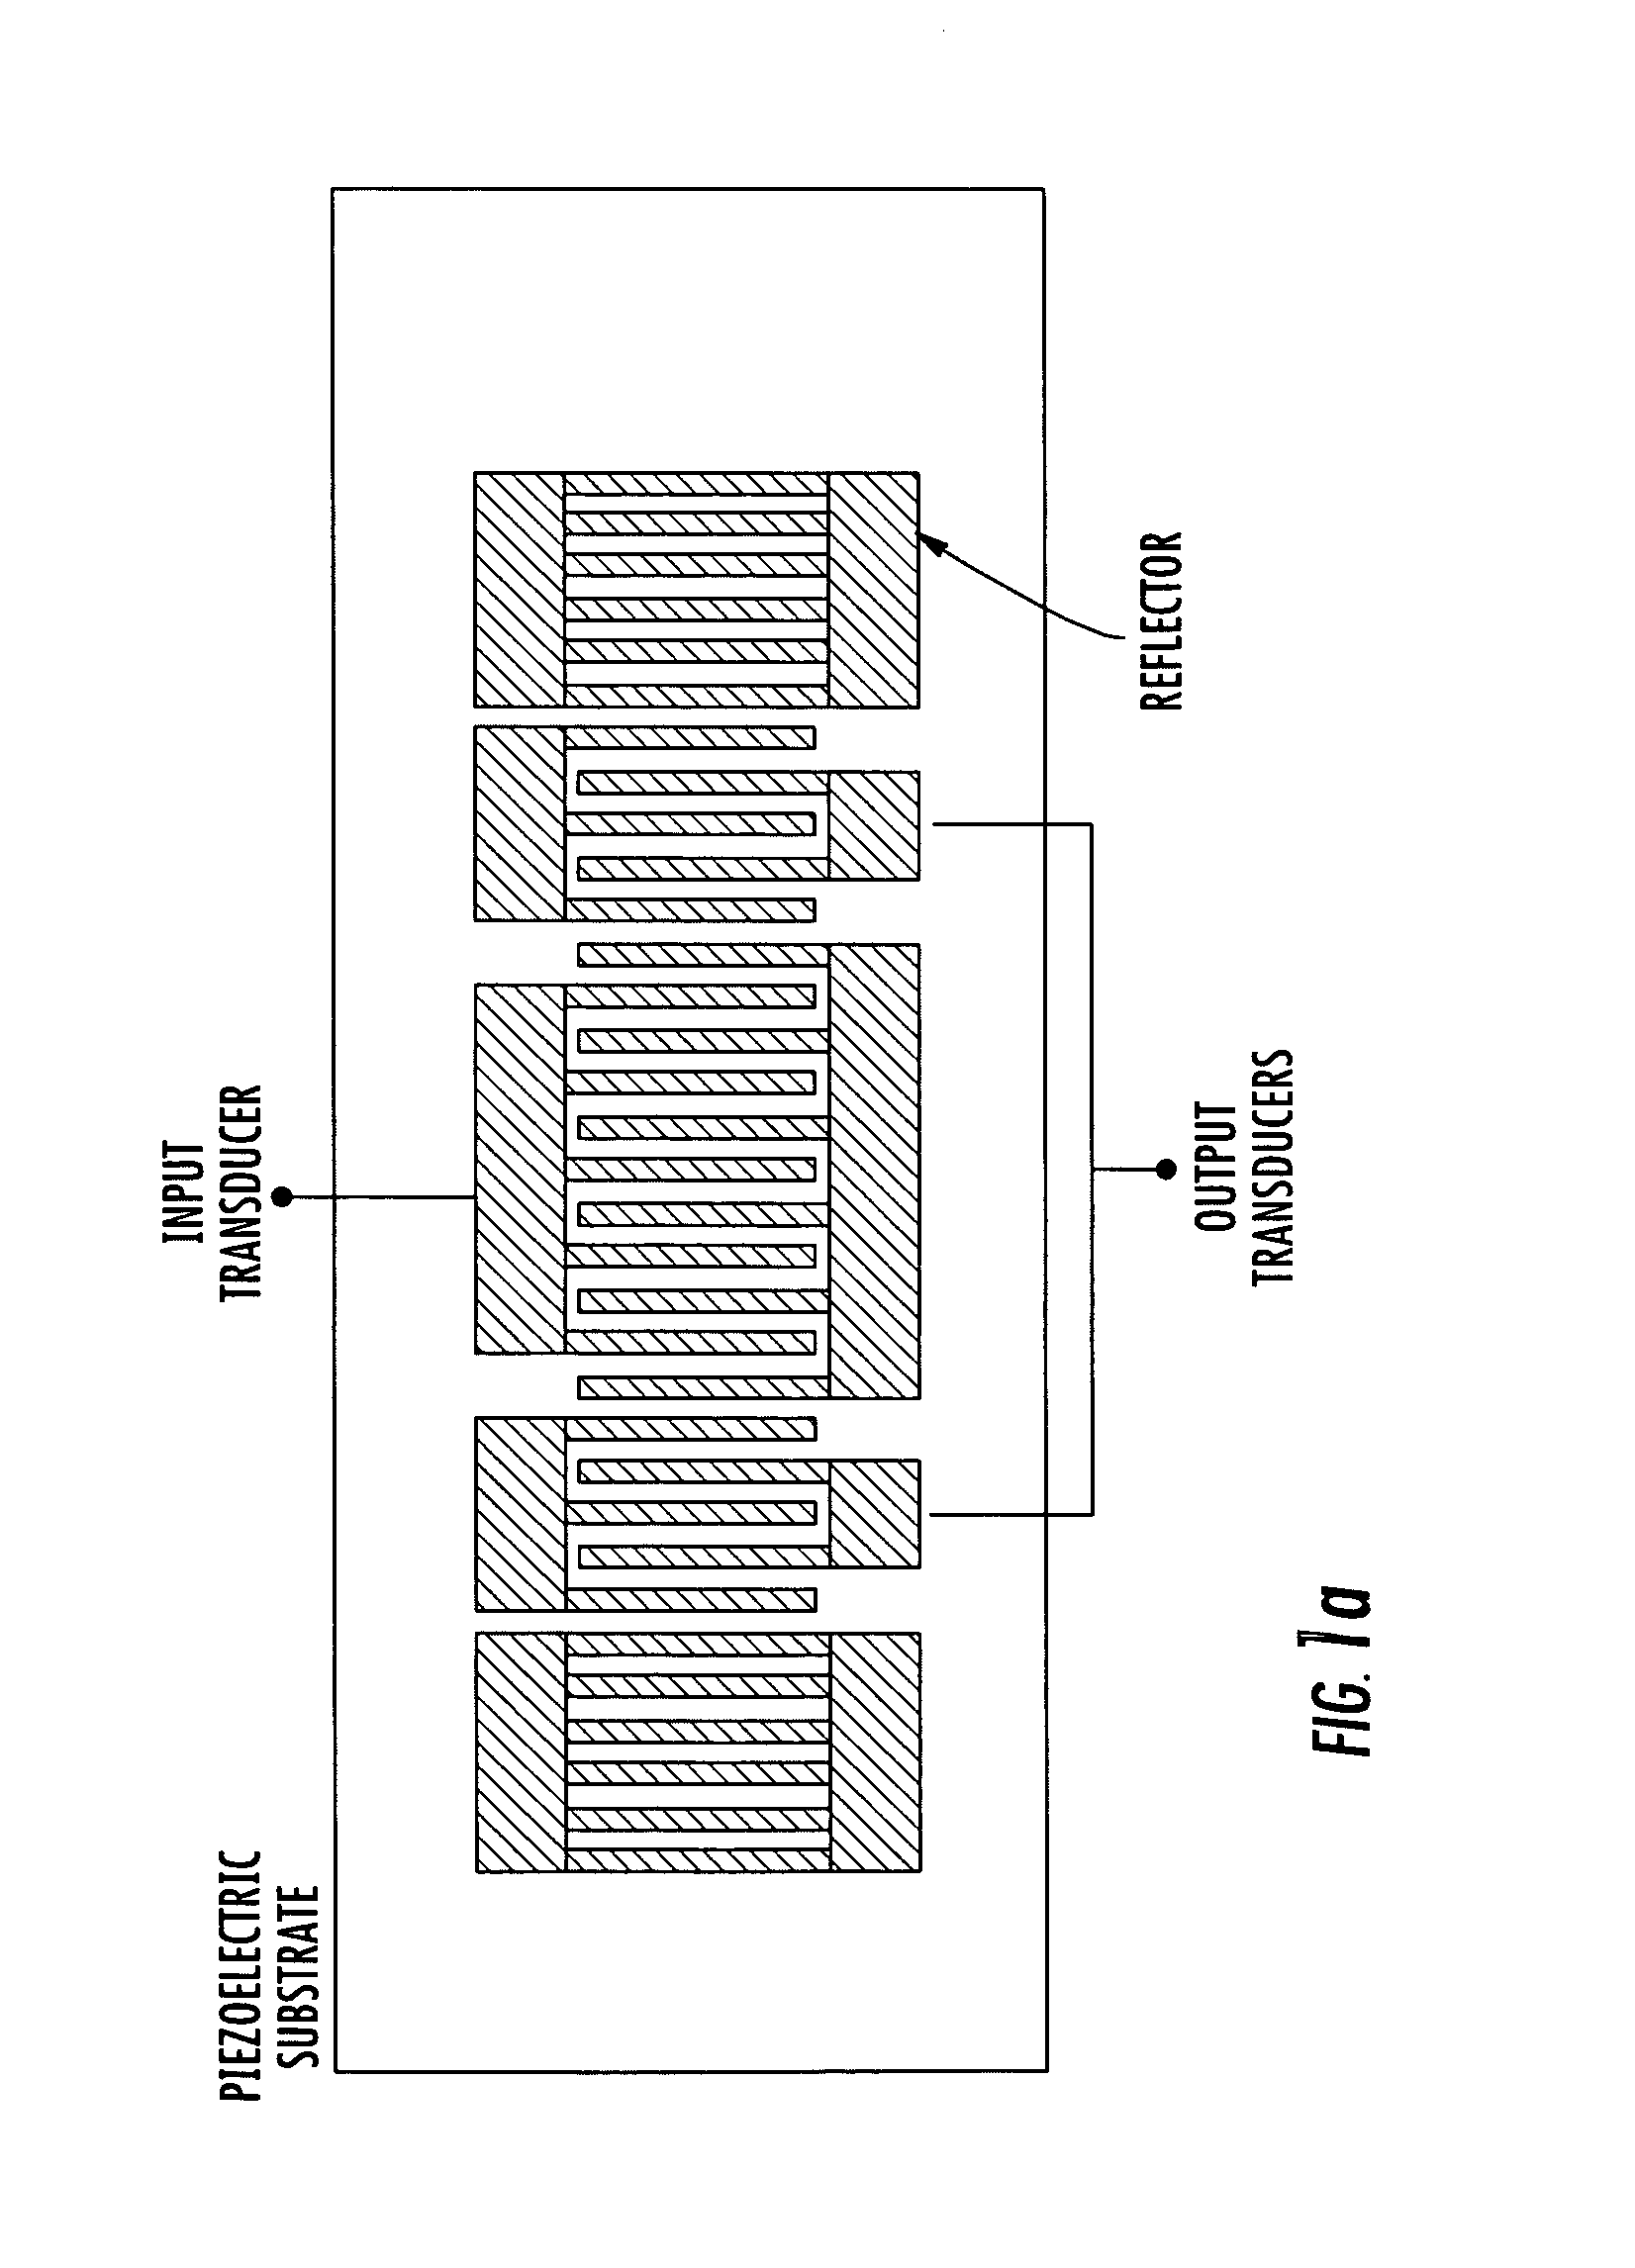 Wafer-level surface acoustic wave filter package with temperature-compensating characteristics